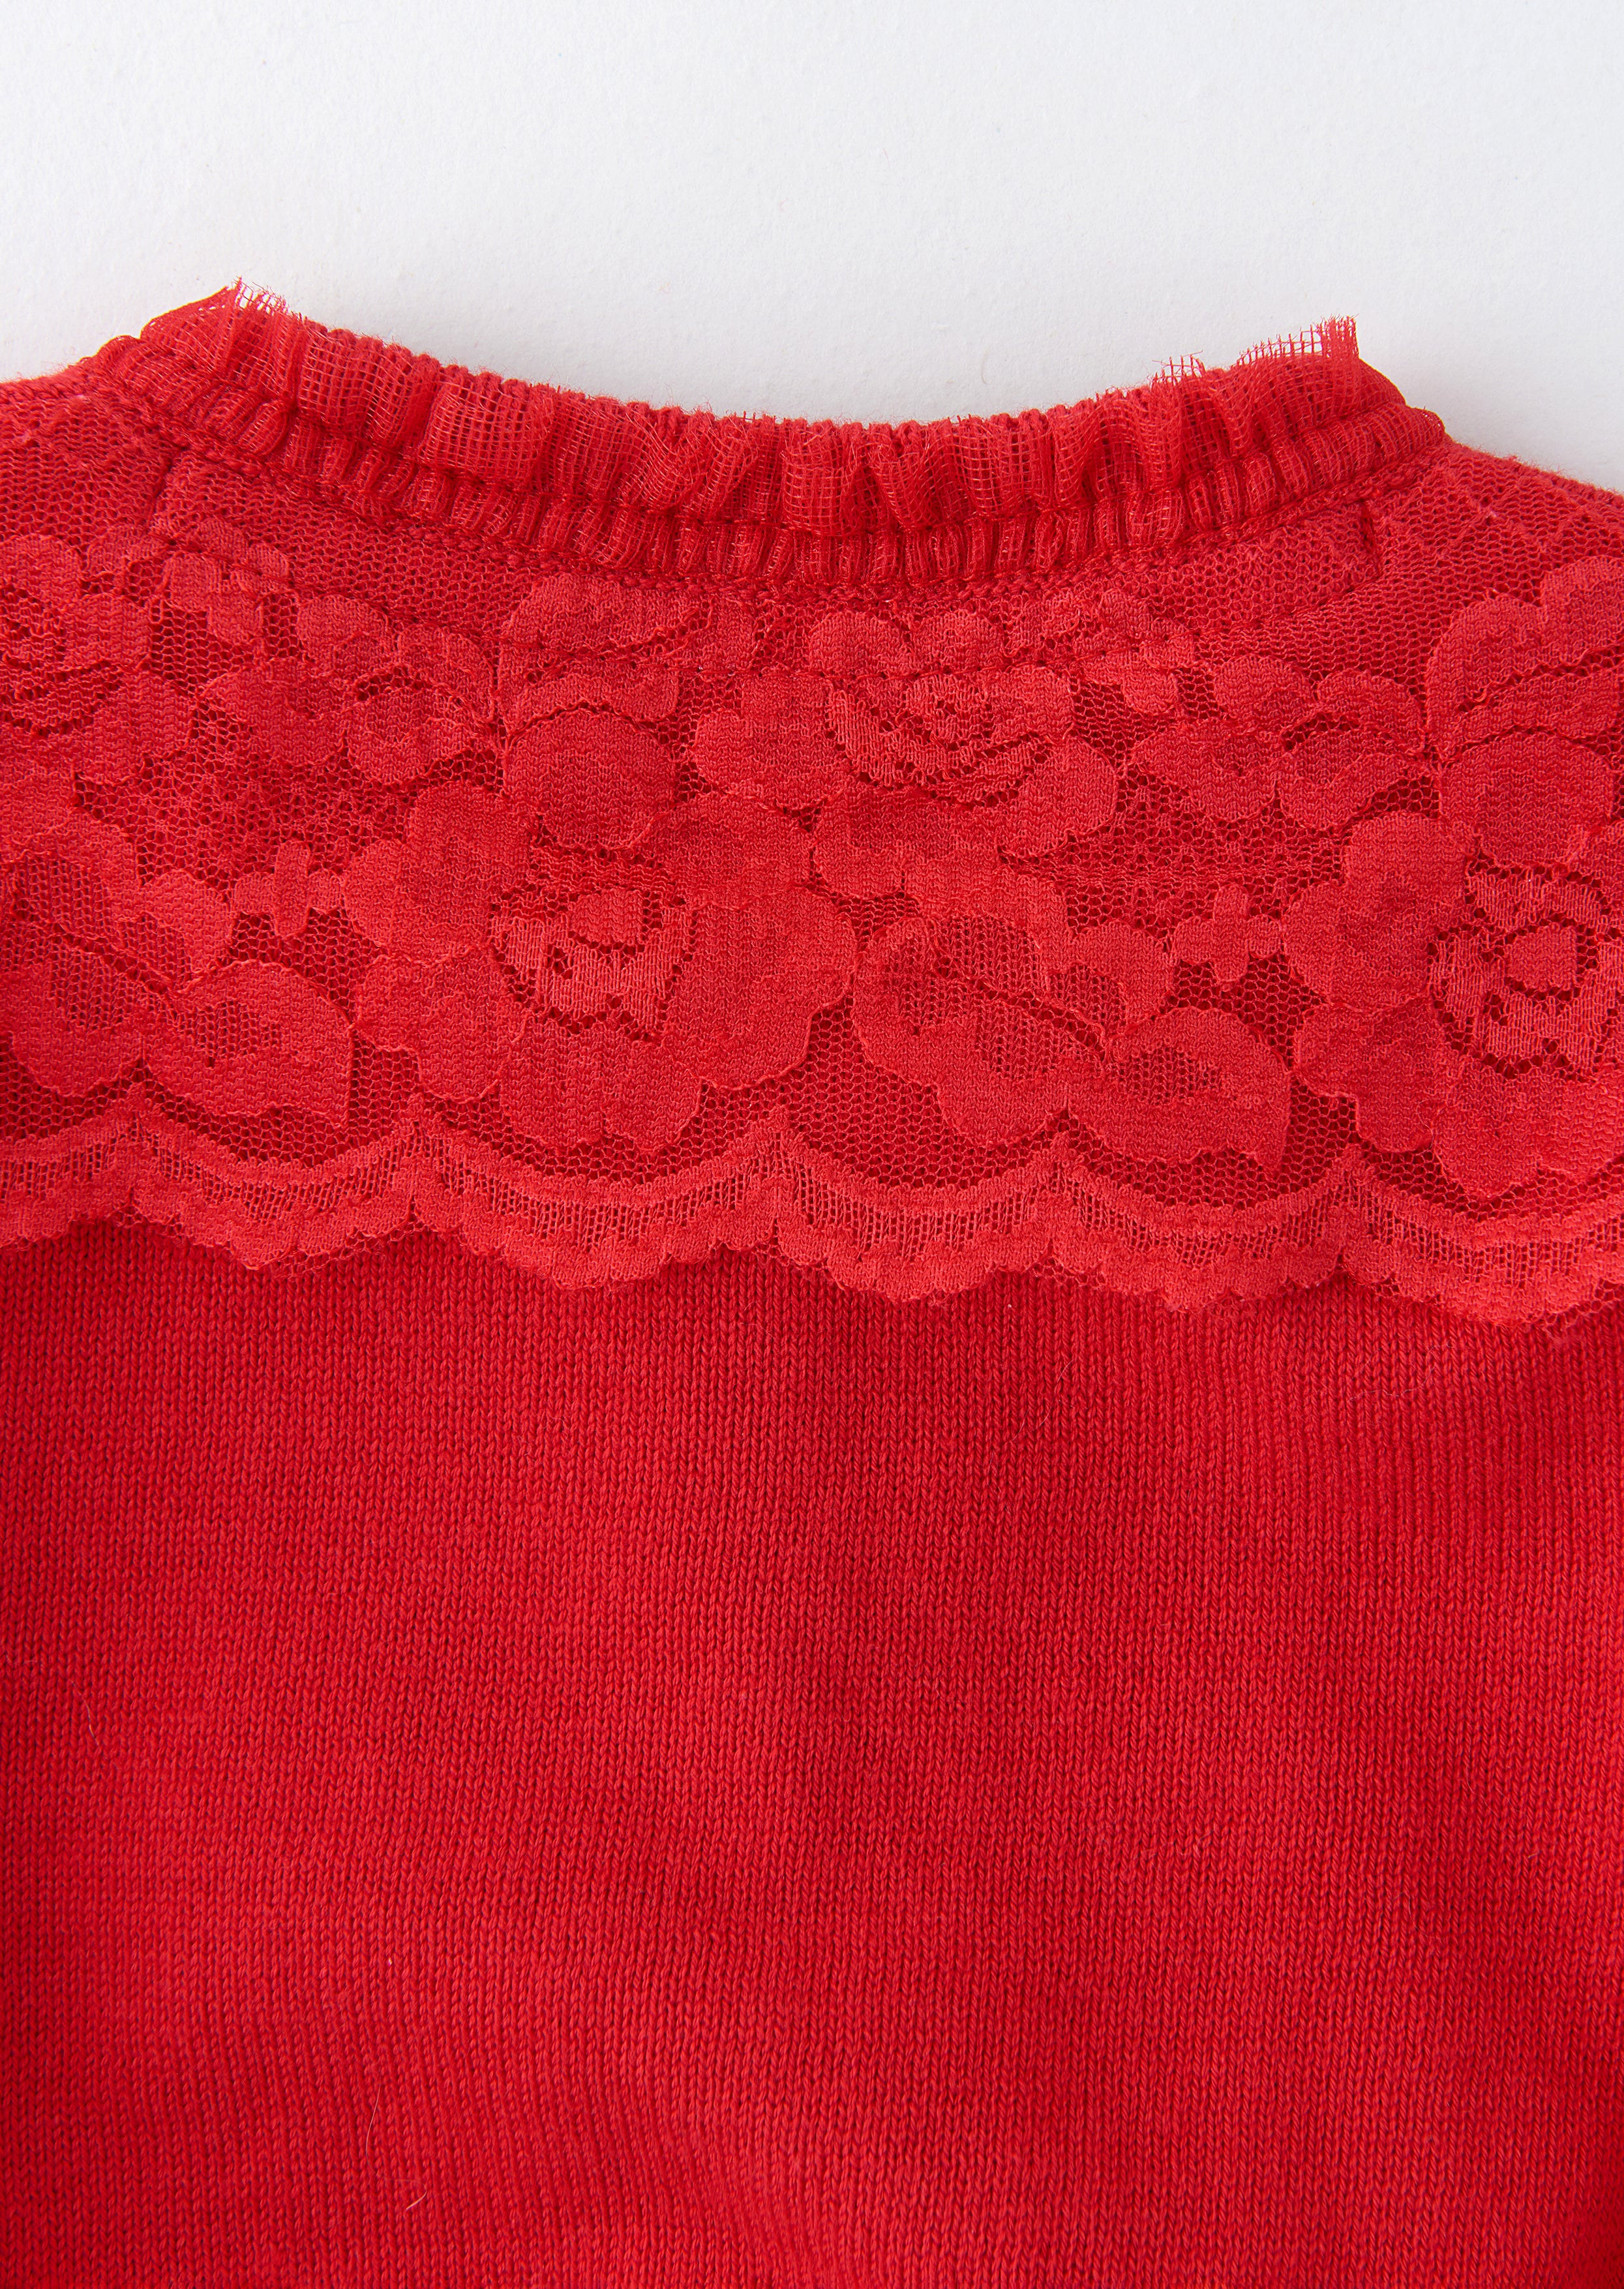 Girls Red Sweater with Lace Trim